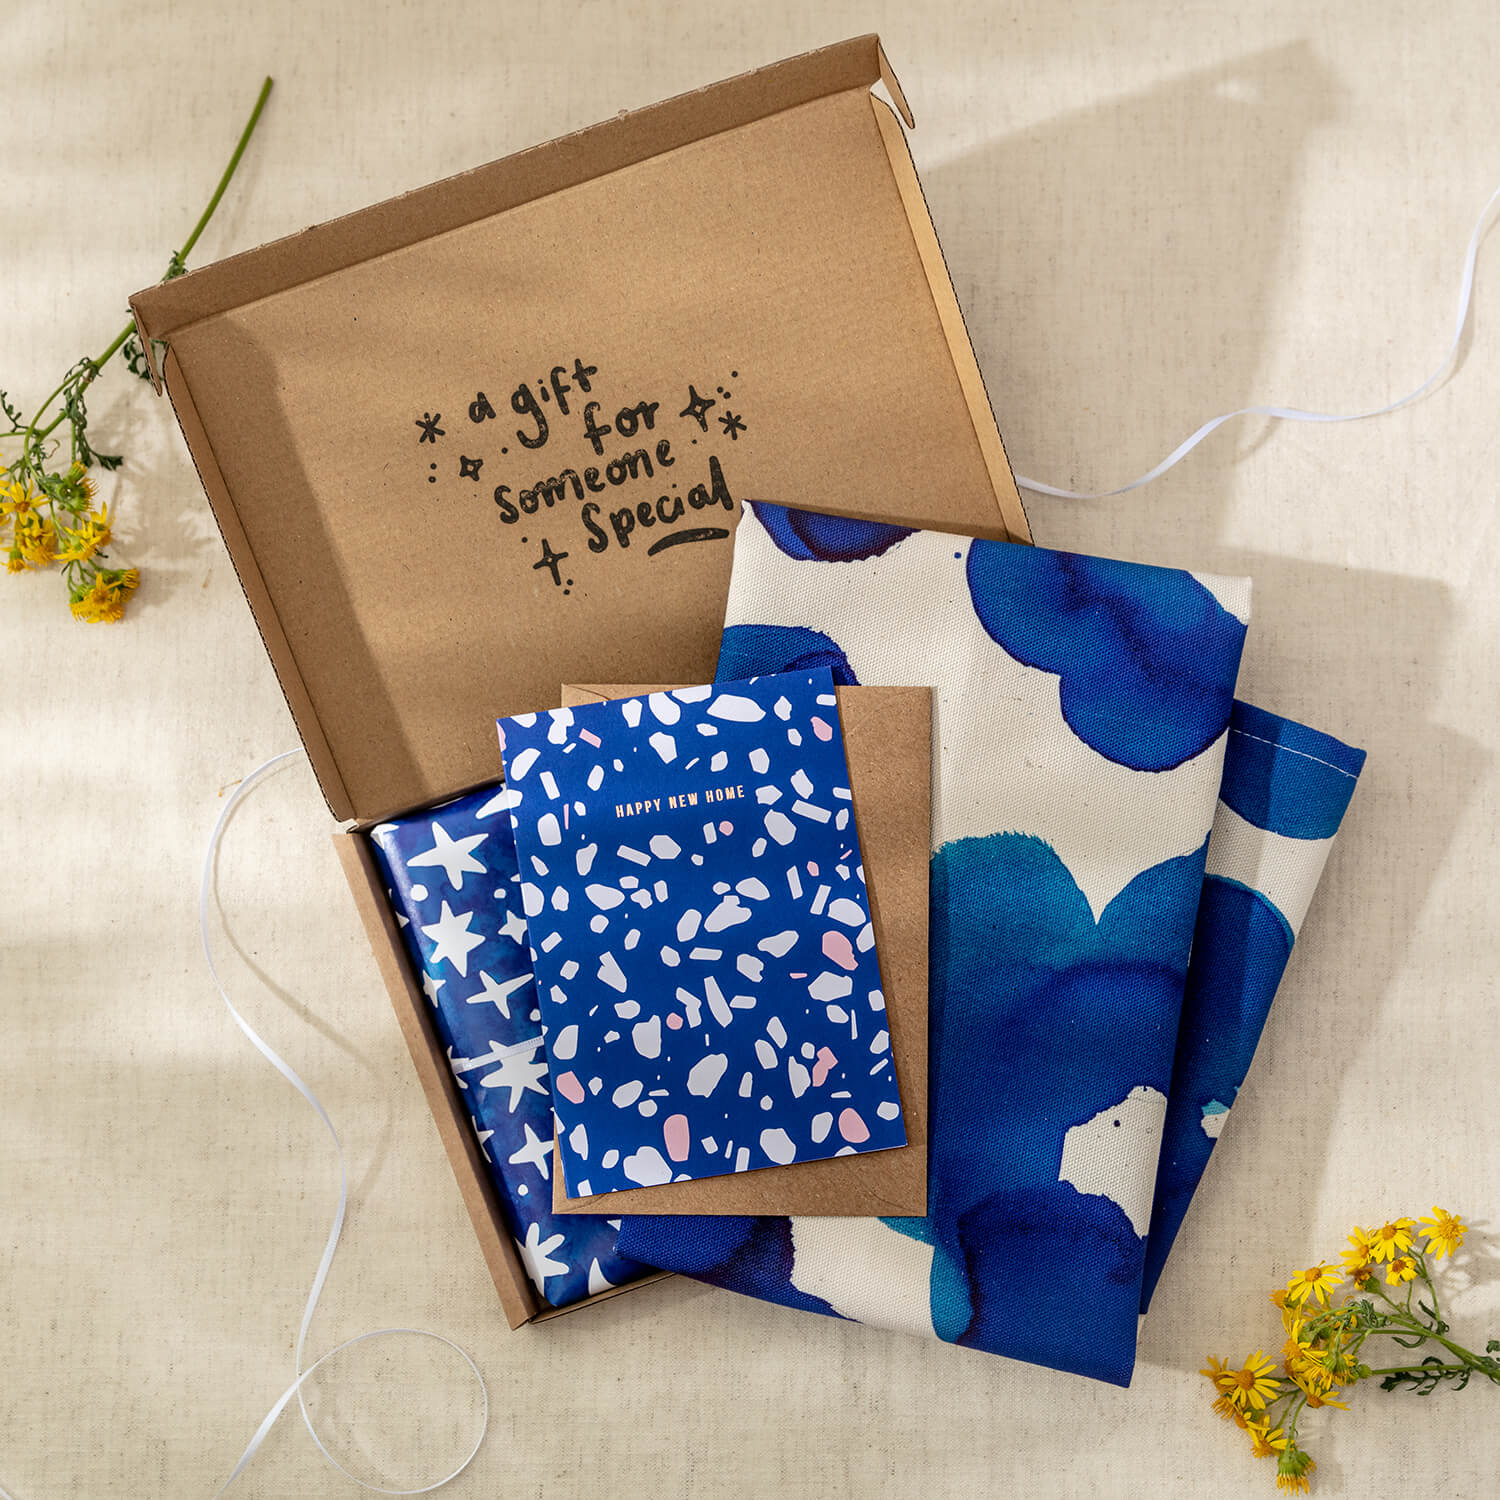 Happy New Home Letterbox Gift includes one cotton tea towel and a handwritten 'Happy New Home' greeting card - The Moonlit Press